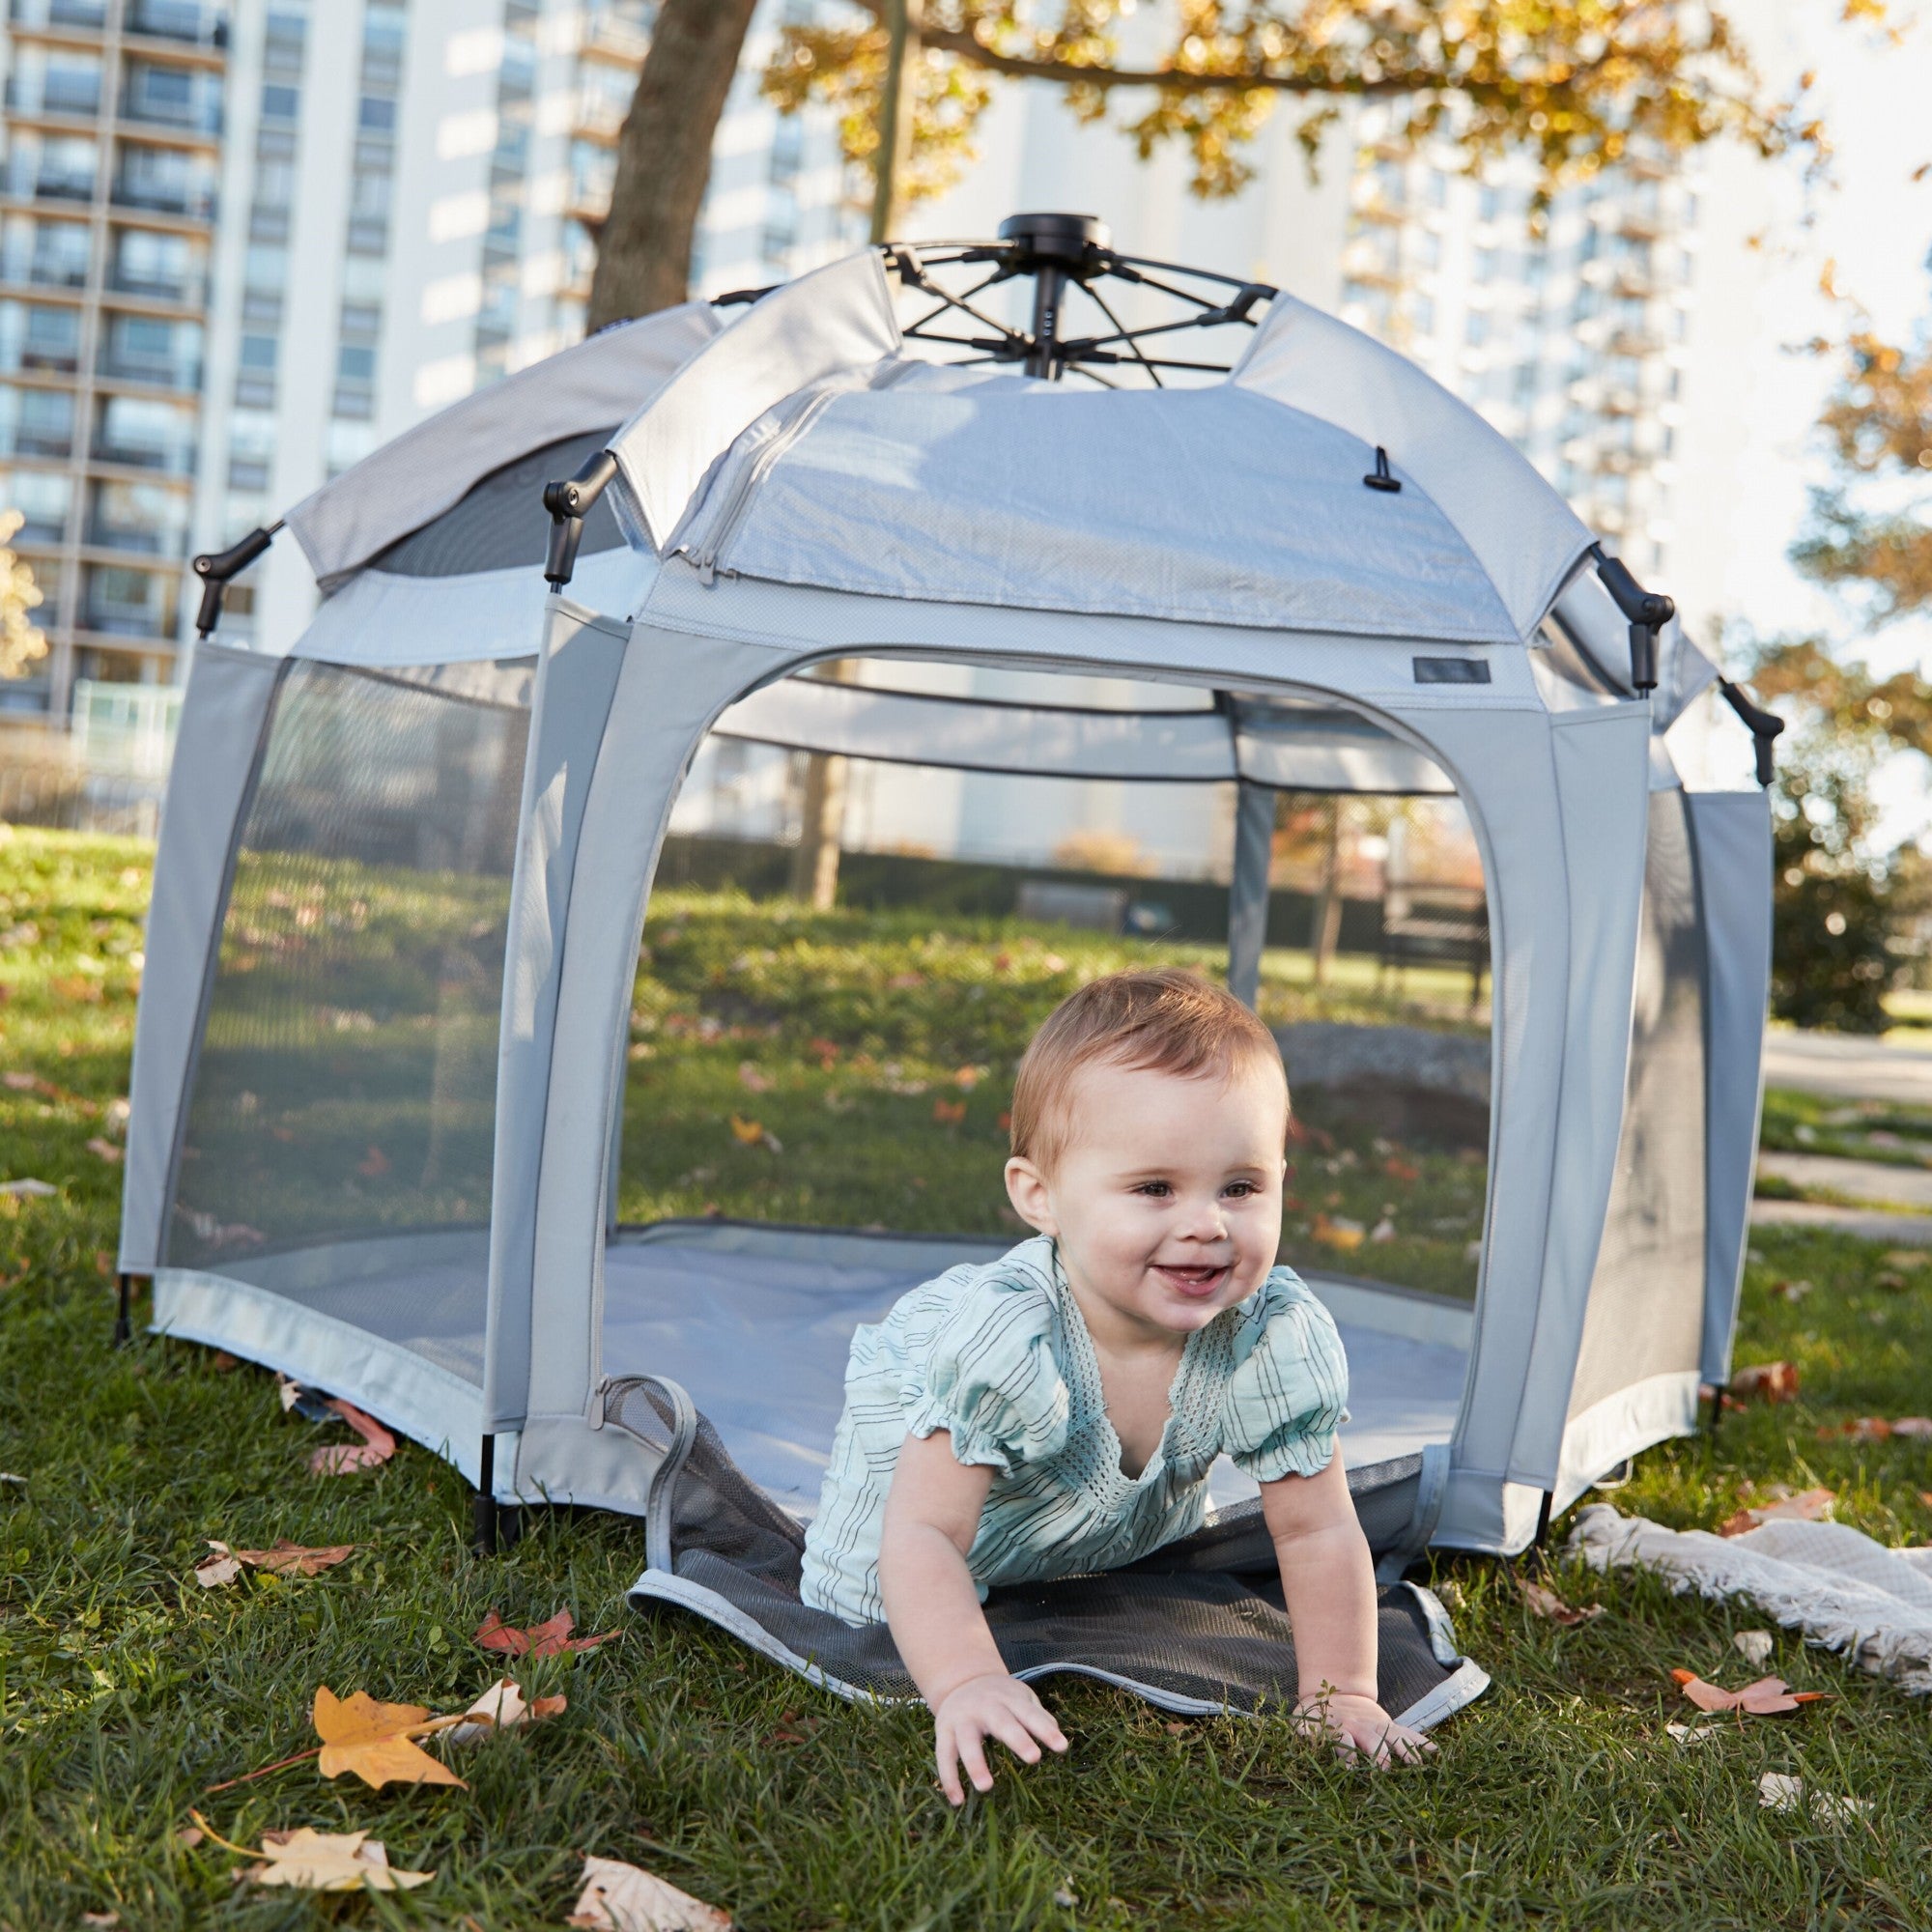 InstaPop Dome Play Yard - stay protected outside